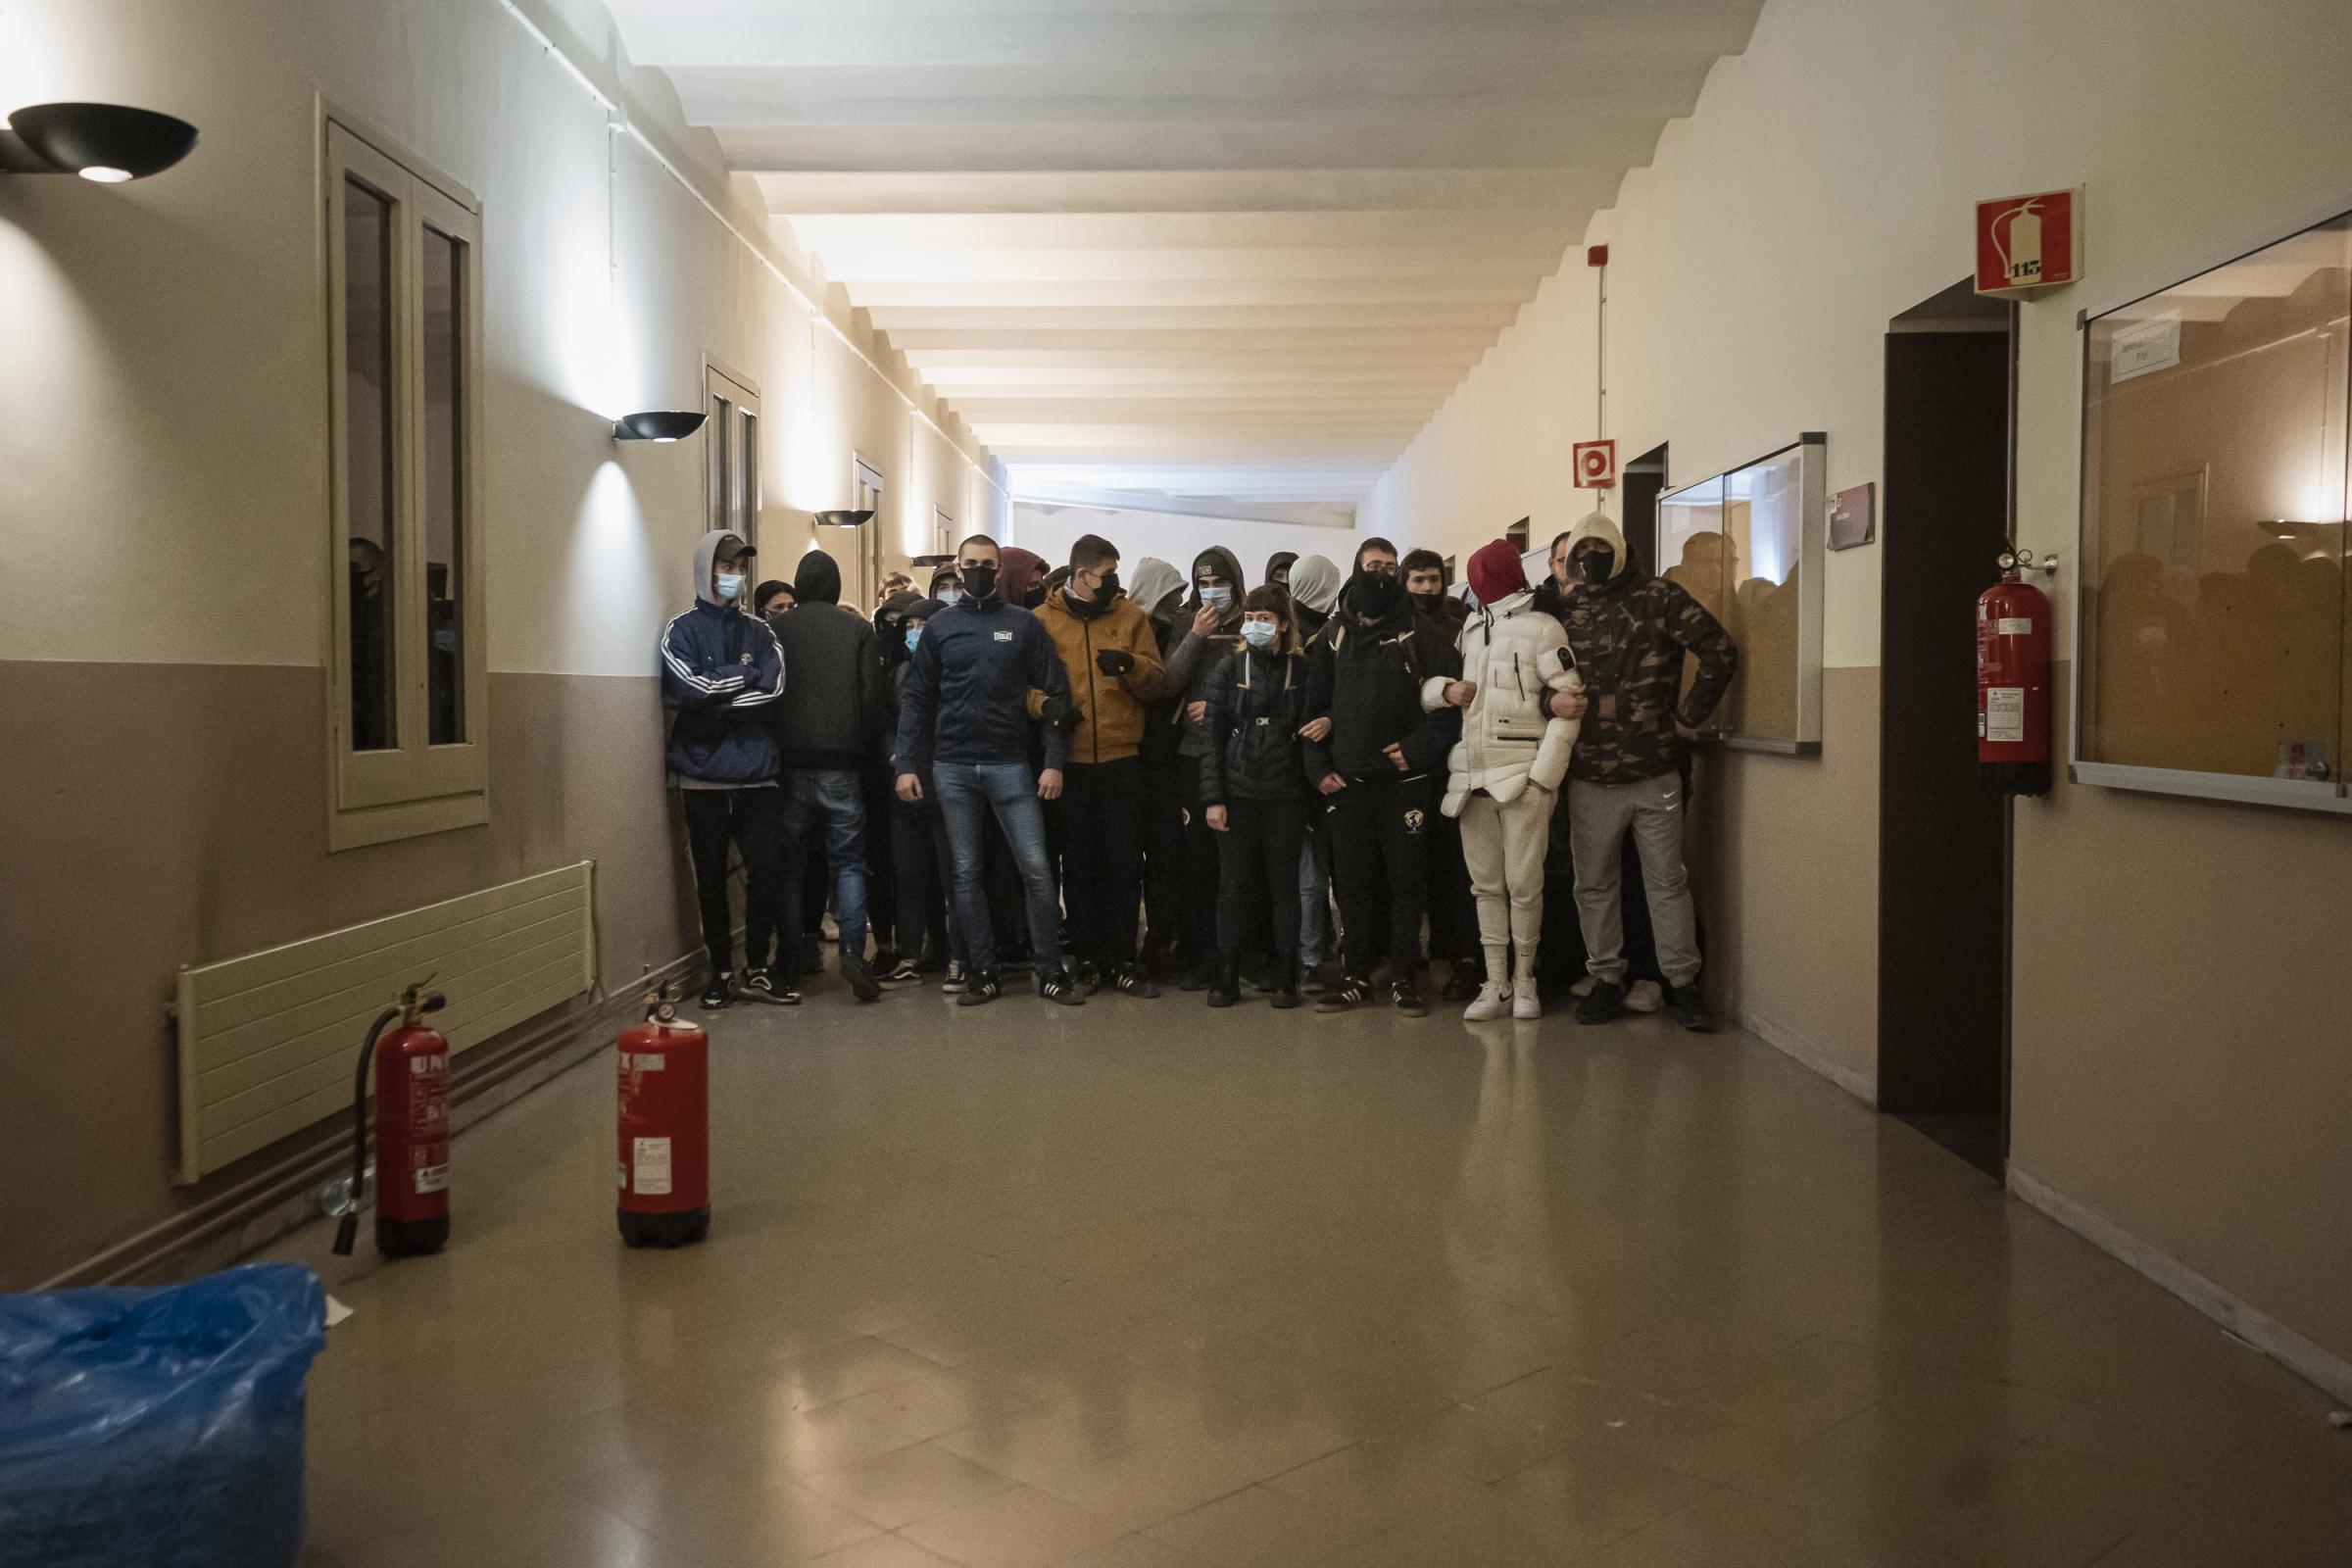 Activists in support of the rapper Pablo Hasel form a human chain at the University of Lleida, to...